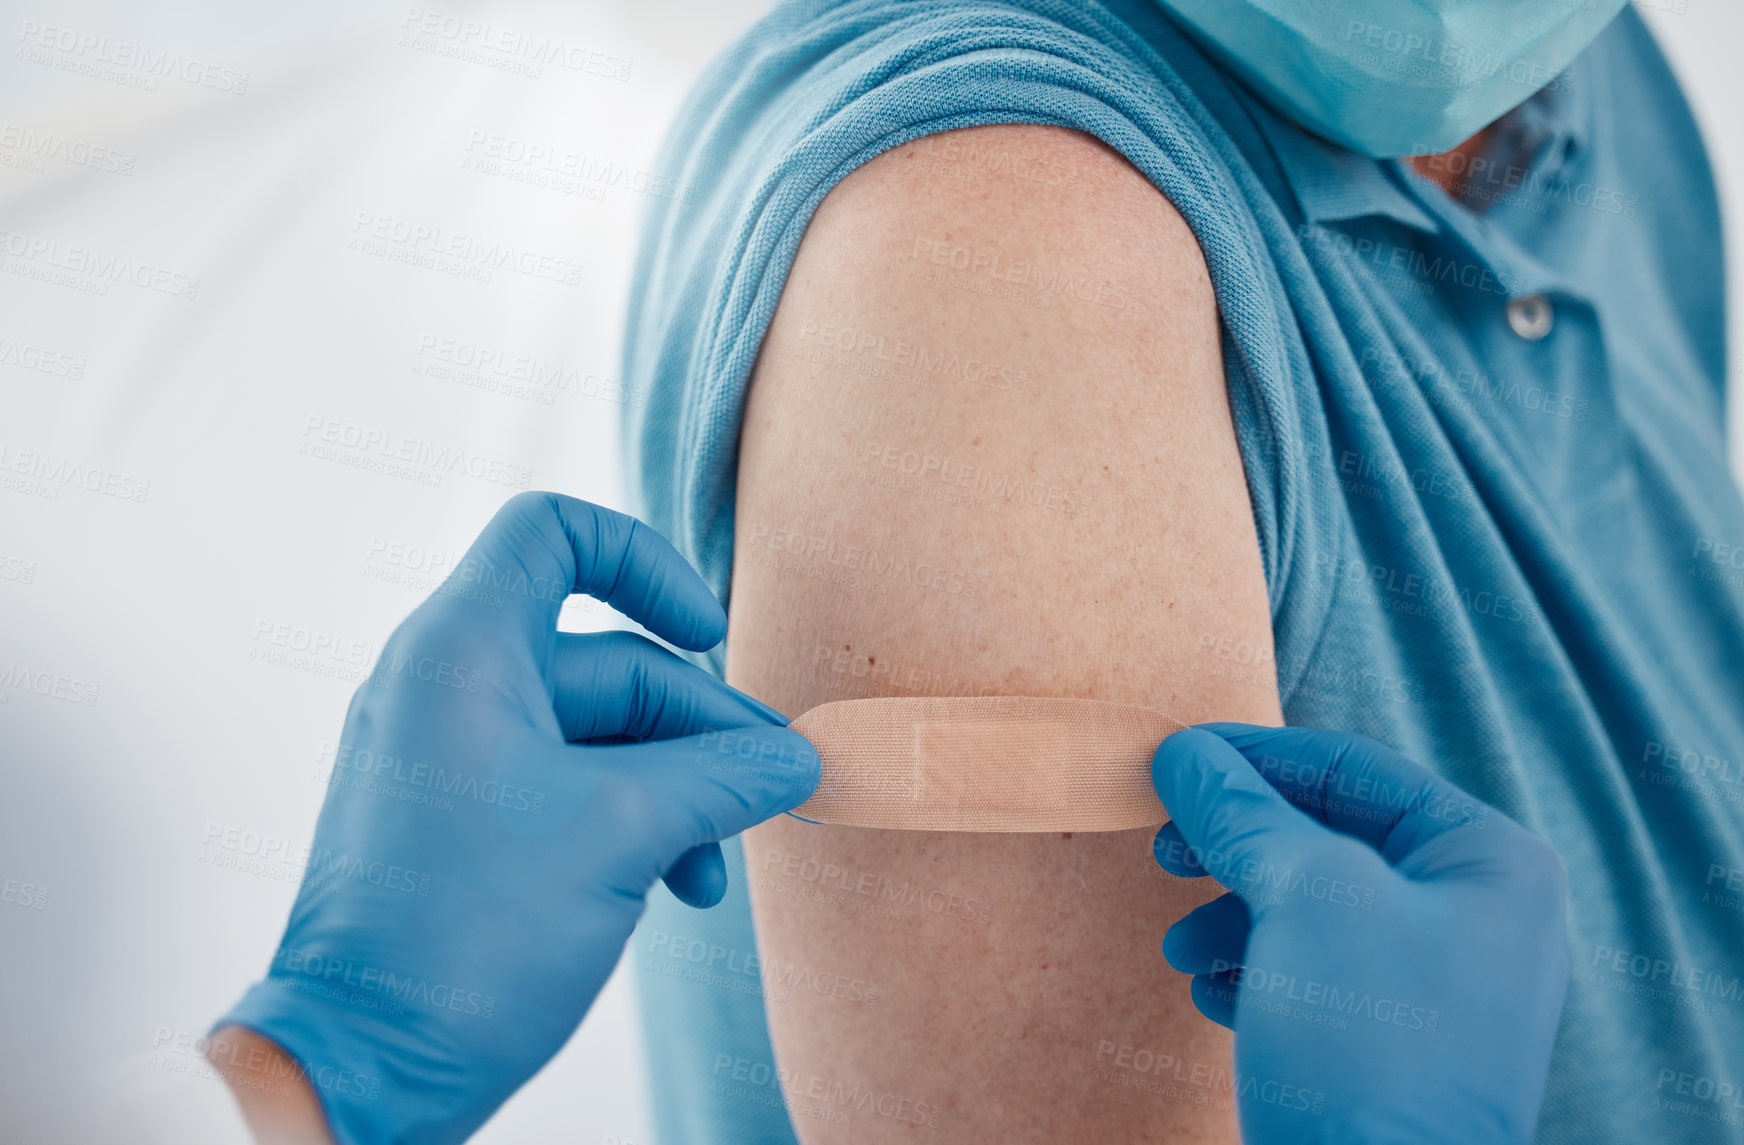 Buy stock photo Cropped shot of an unrecognizable male doctor placing a plaster on a patient's arm after giving him the covid 19 vaccine